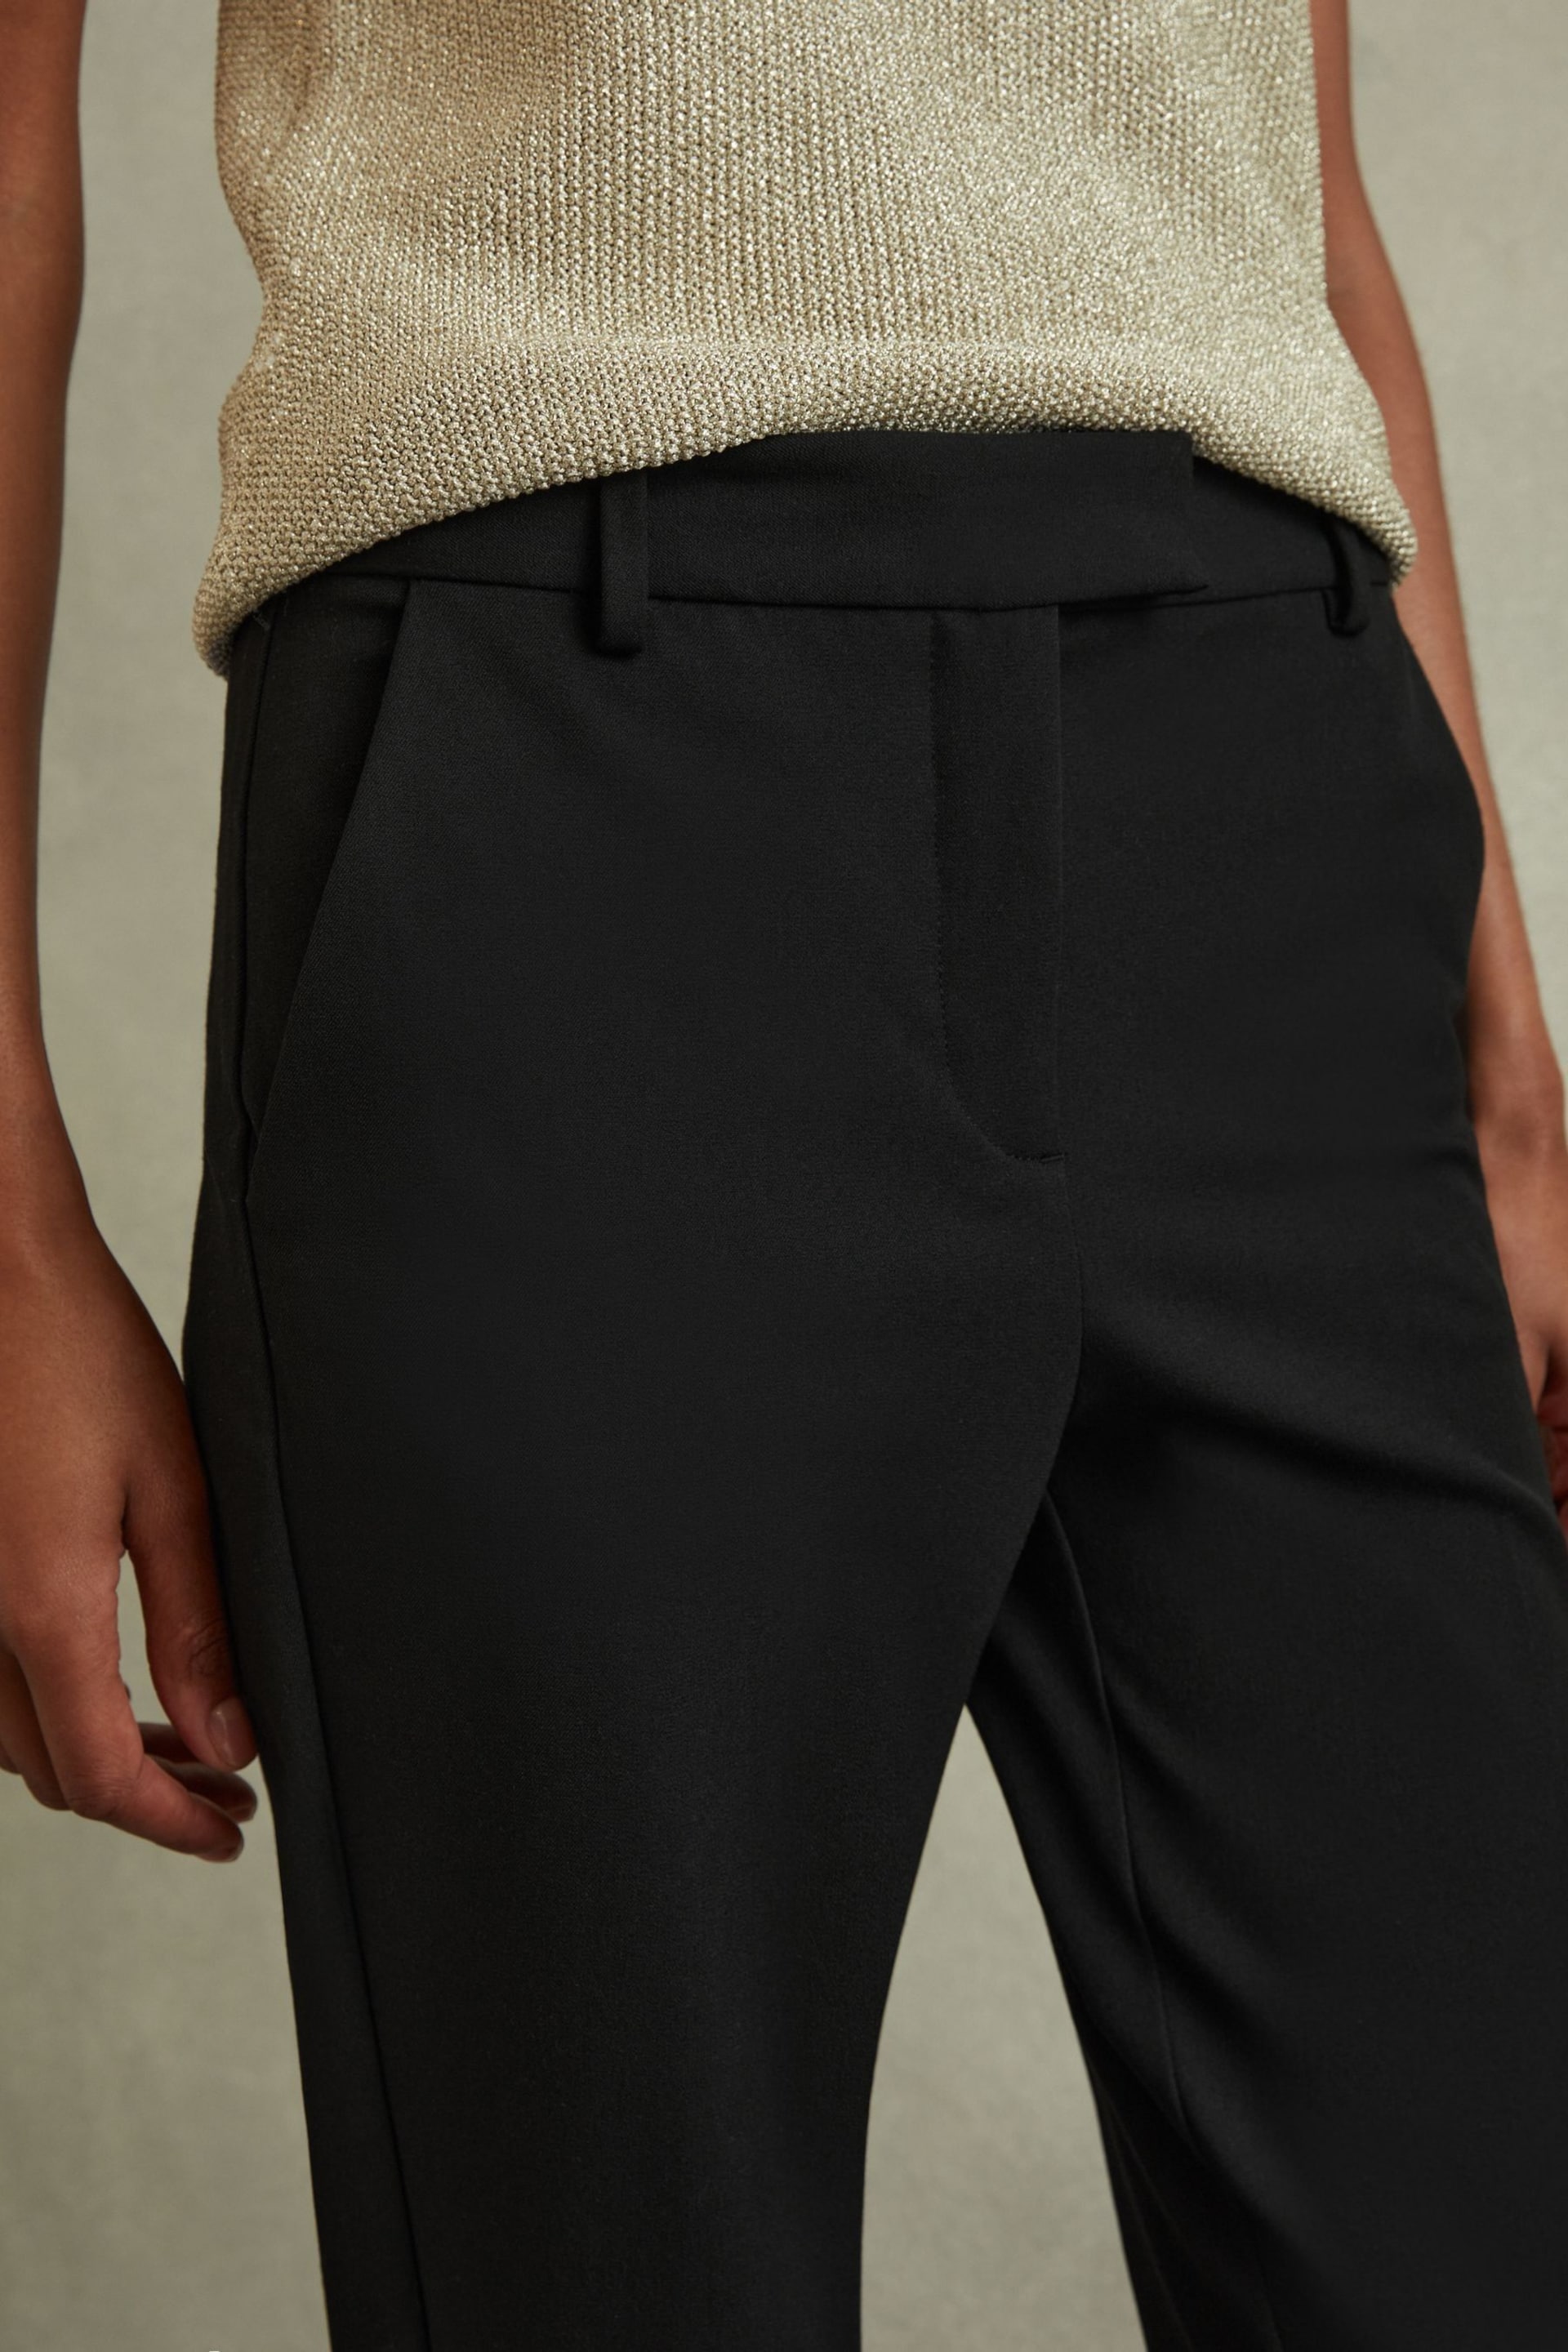 Reiss Black Joanne Slim Fit Tailored Trousers - Image 3 of 4